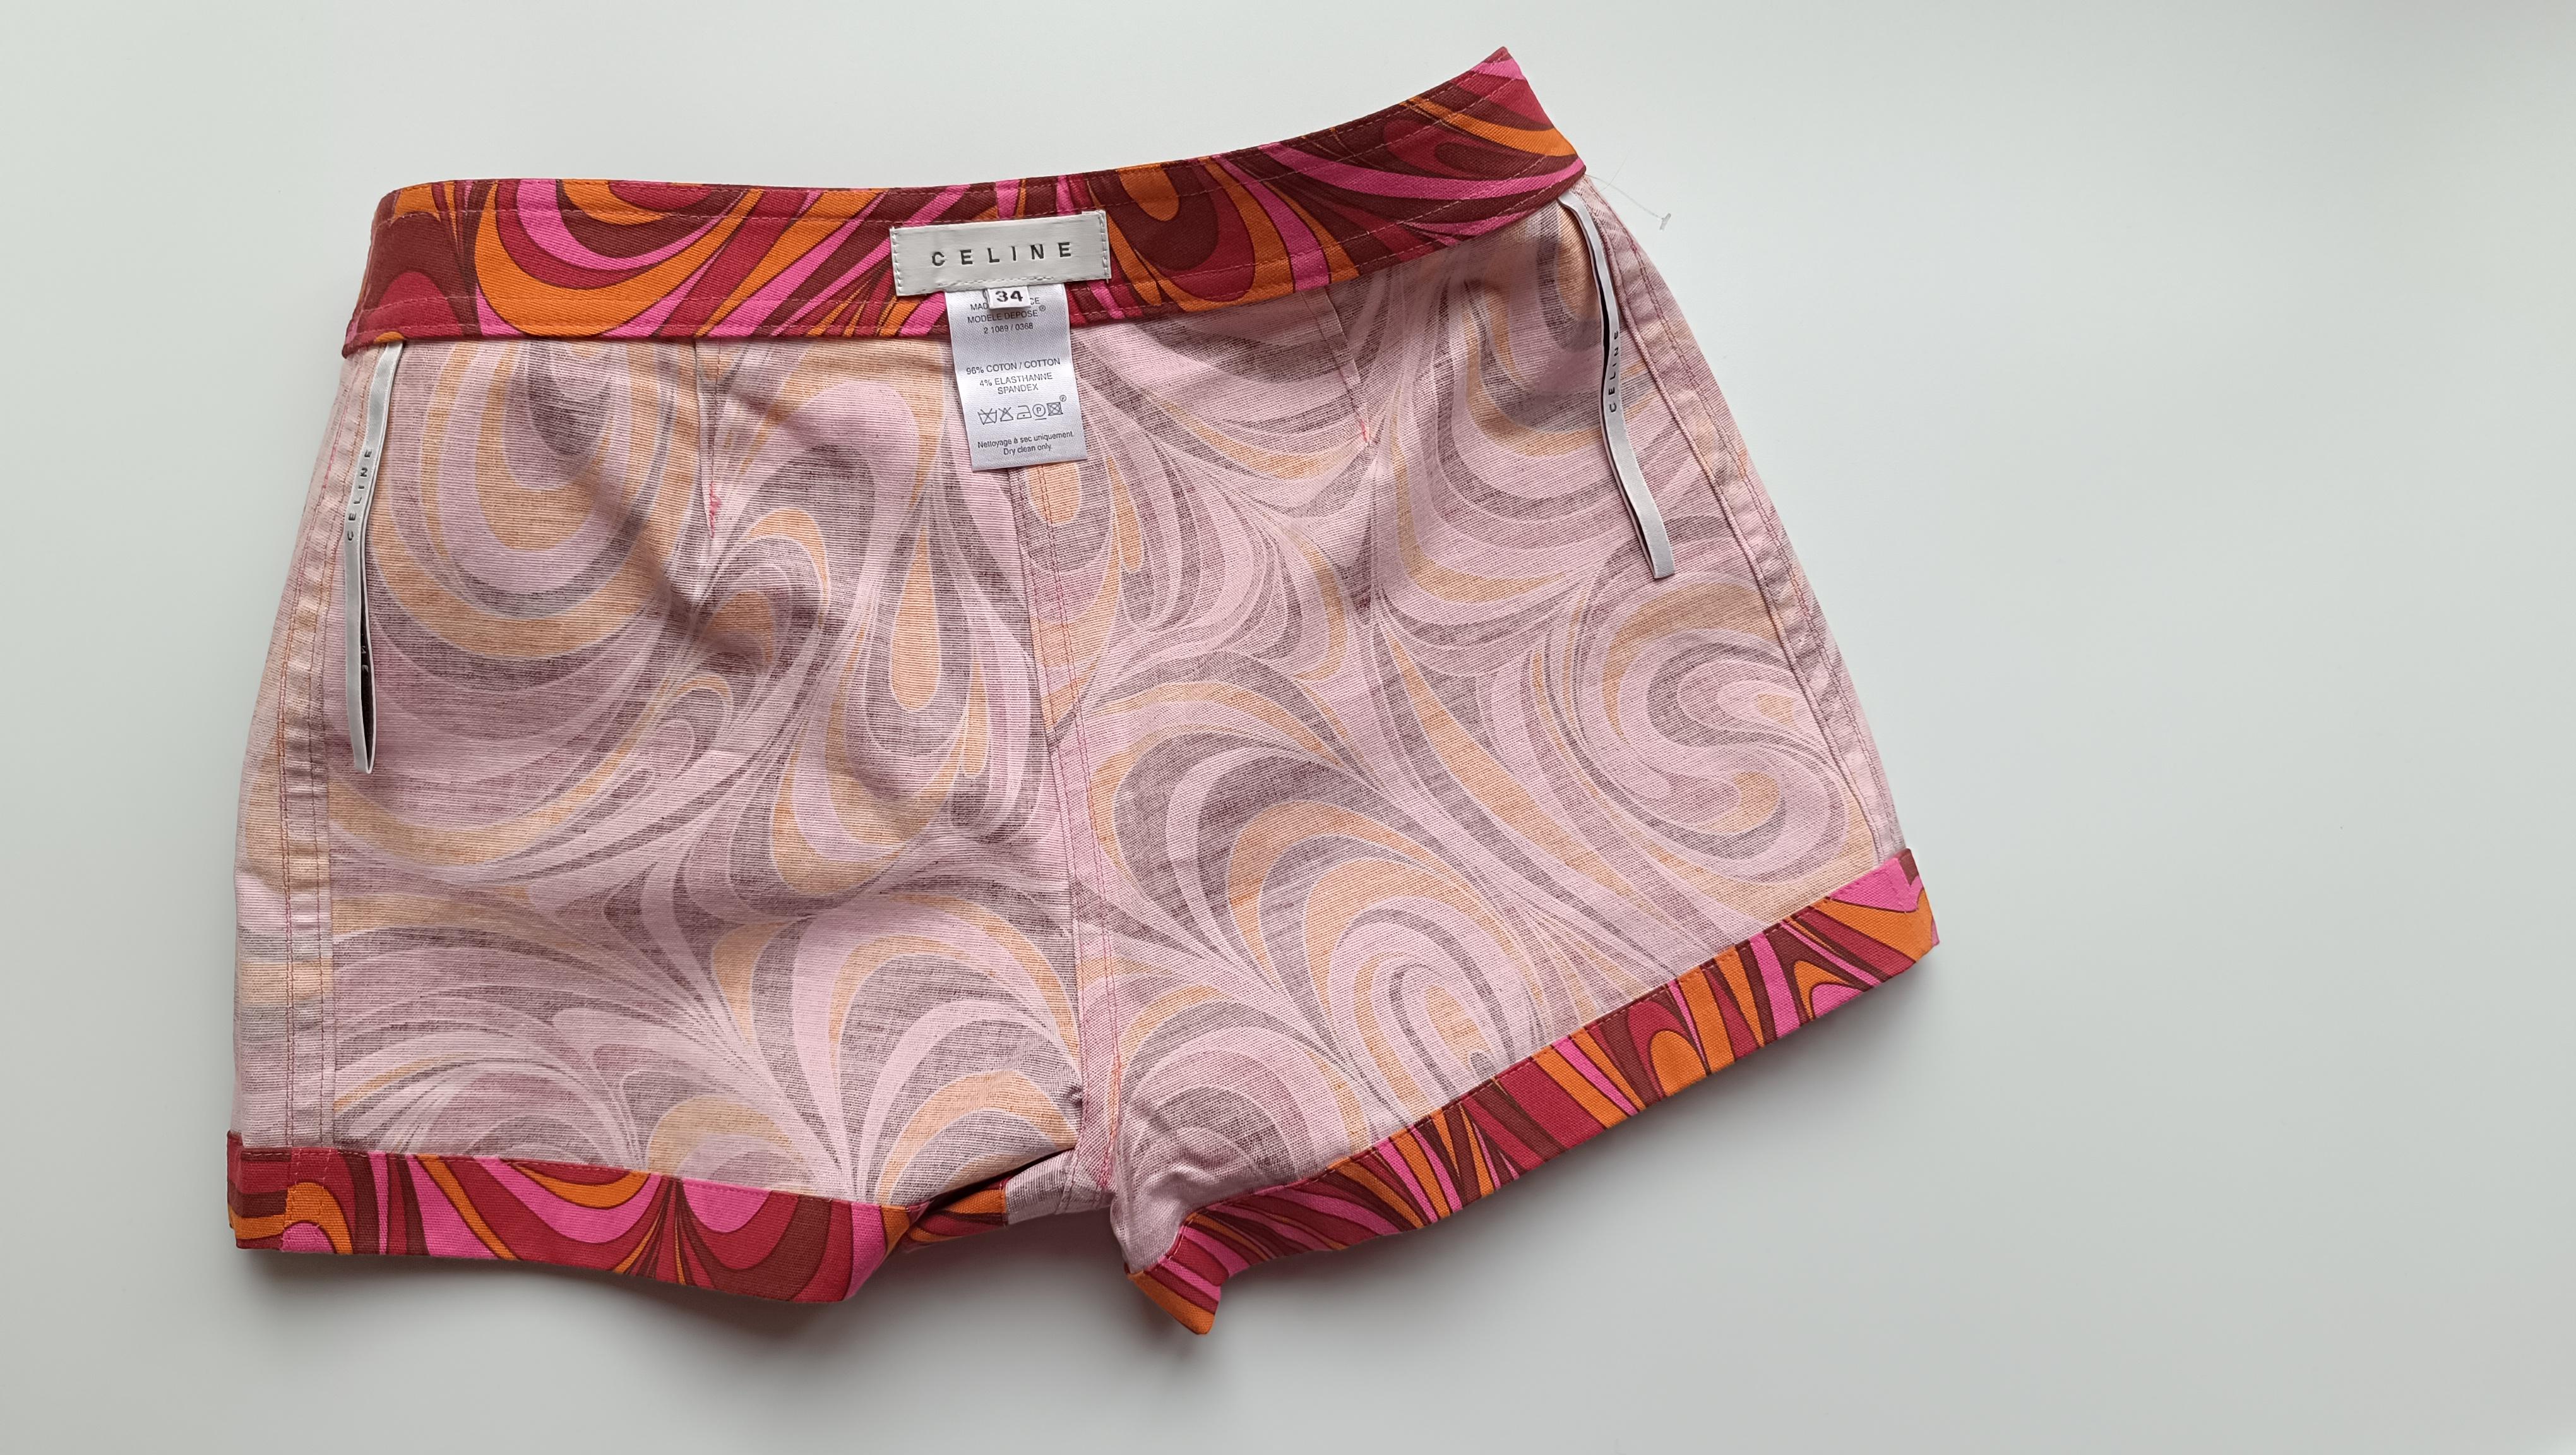 Сeline shorts pink barbie style / barbiecore abstract print  For Sale 4